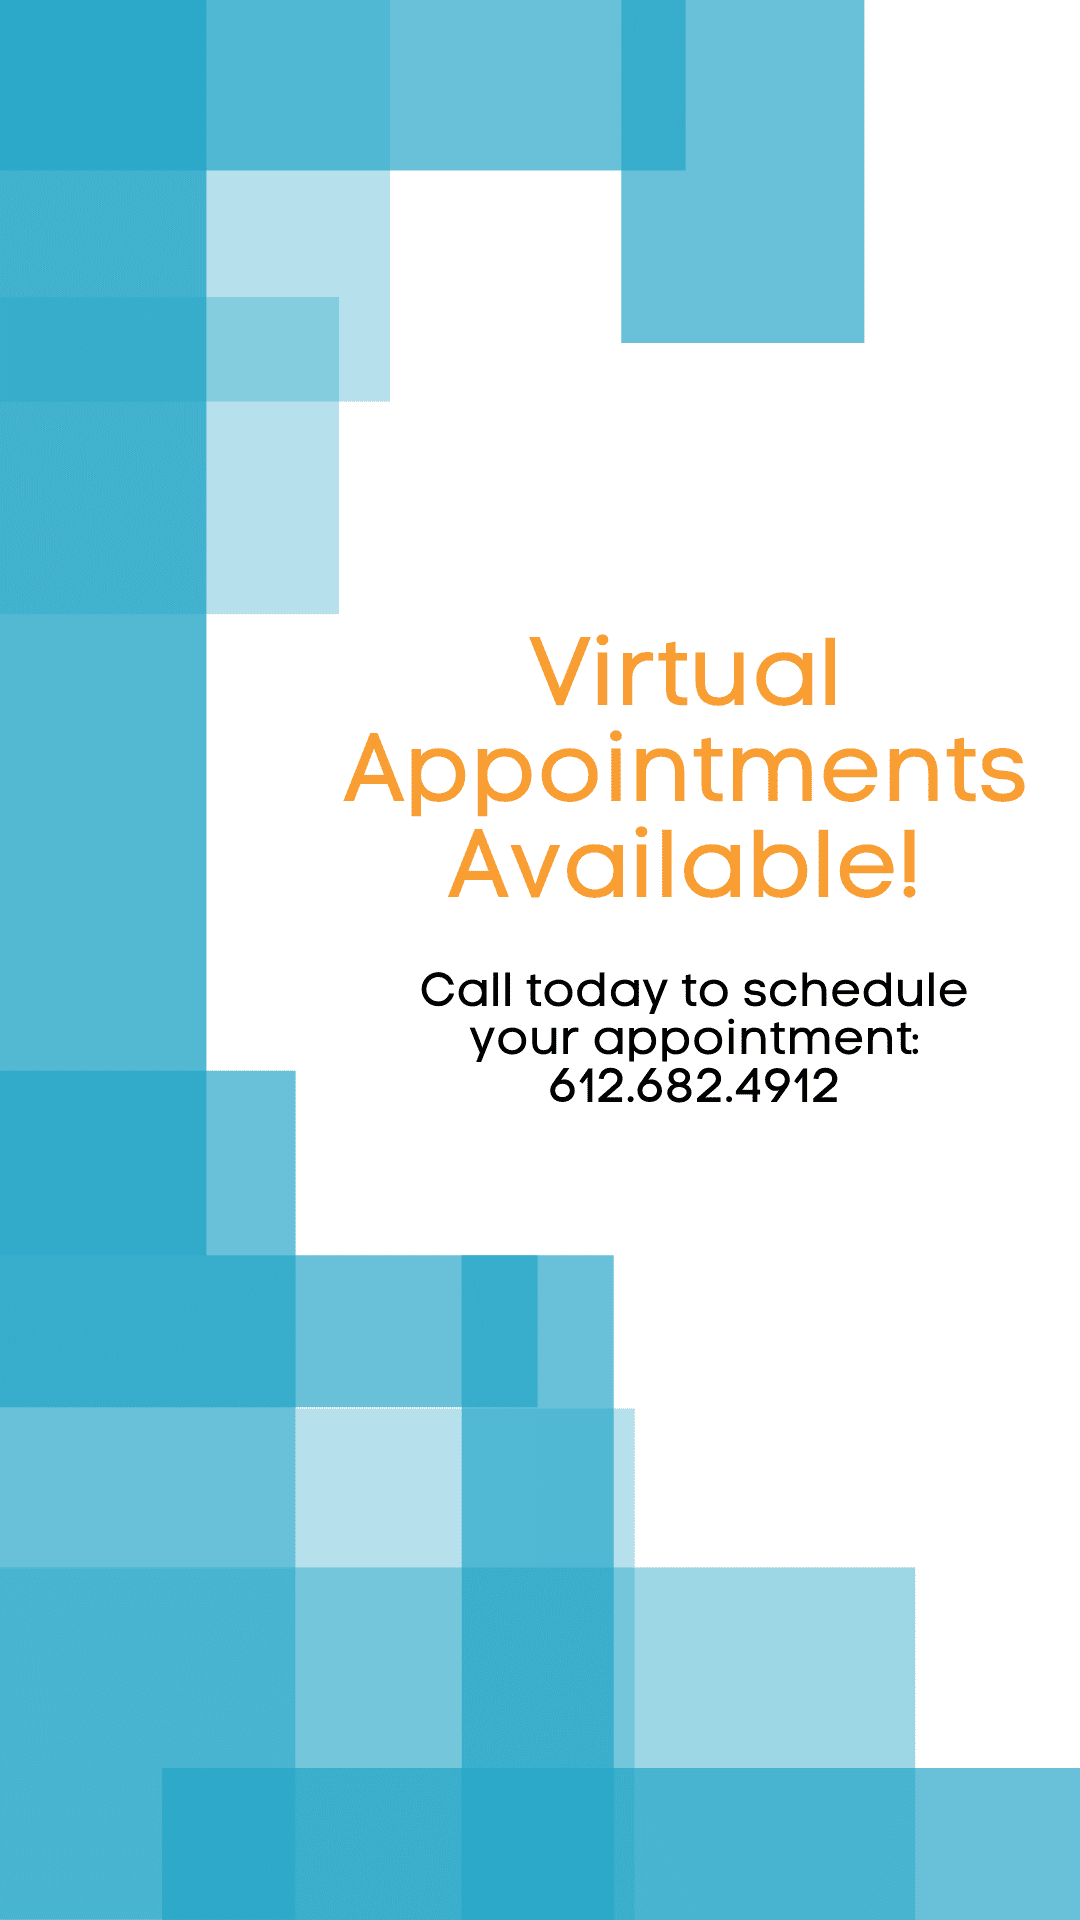 Virtual telehealth appointments available for severe depression, anxiety, PTSD, and psychiatric help.